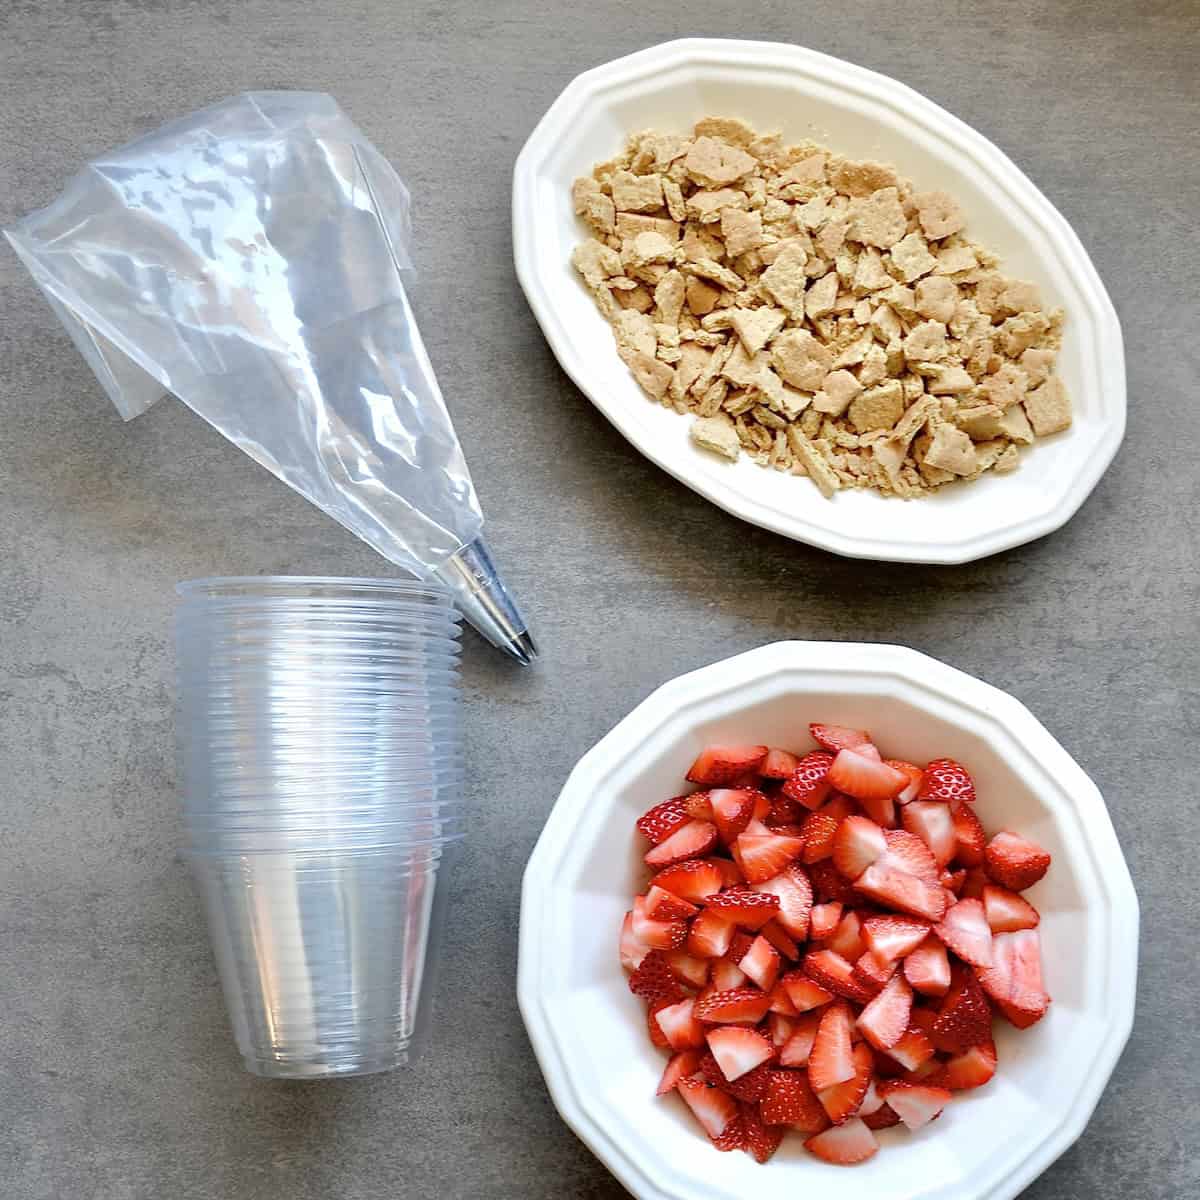 Strawberries and graham cracker pieces